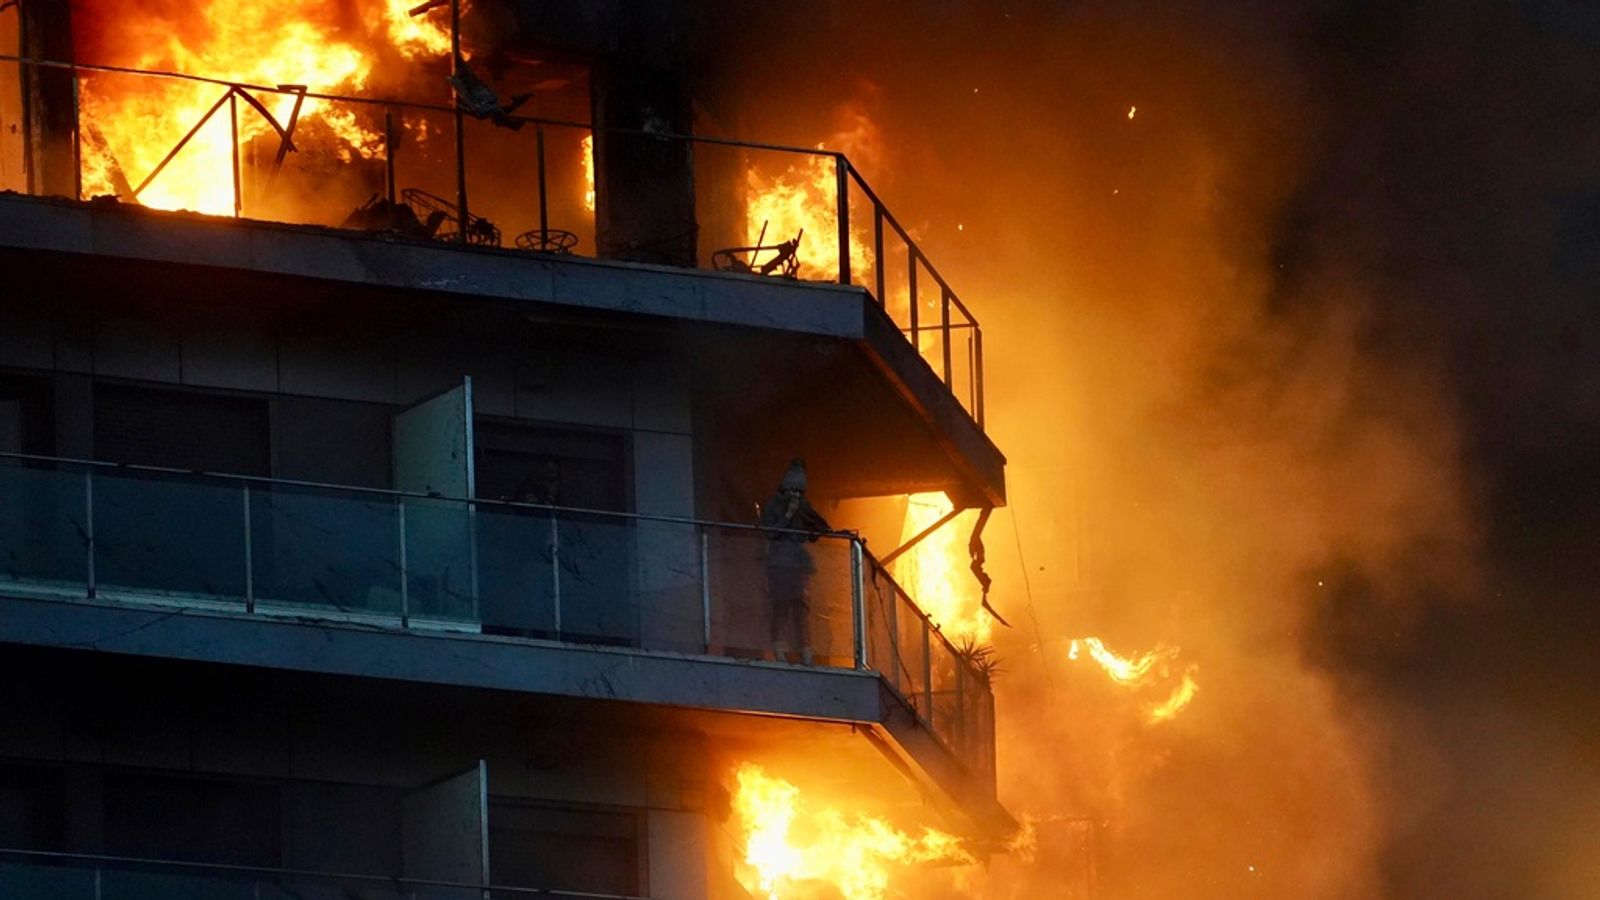 Valencia: Huge fire engulfs block of flats in Spanish city